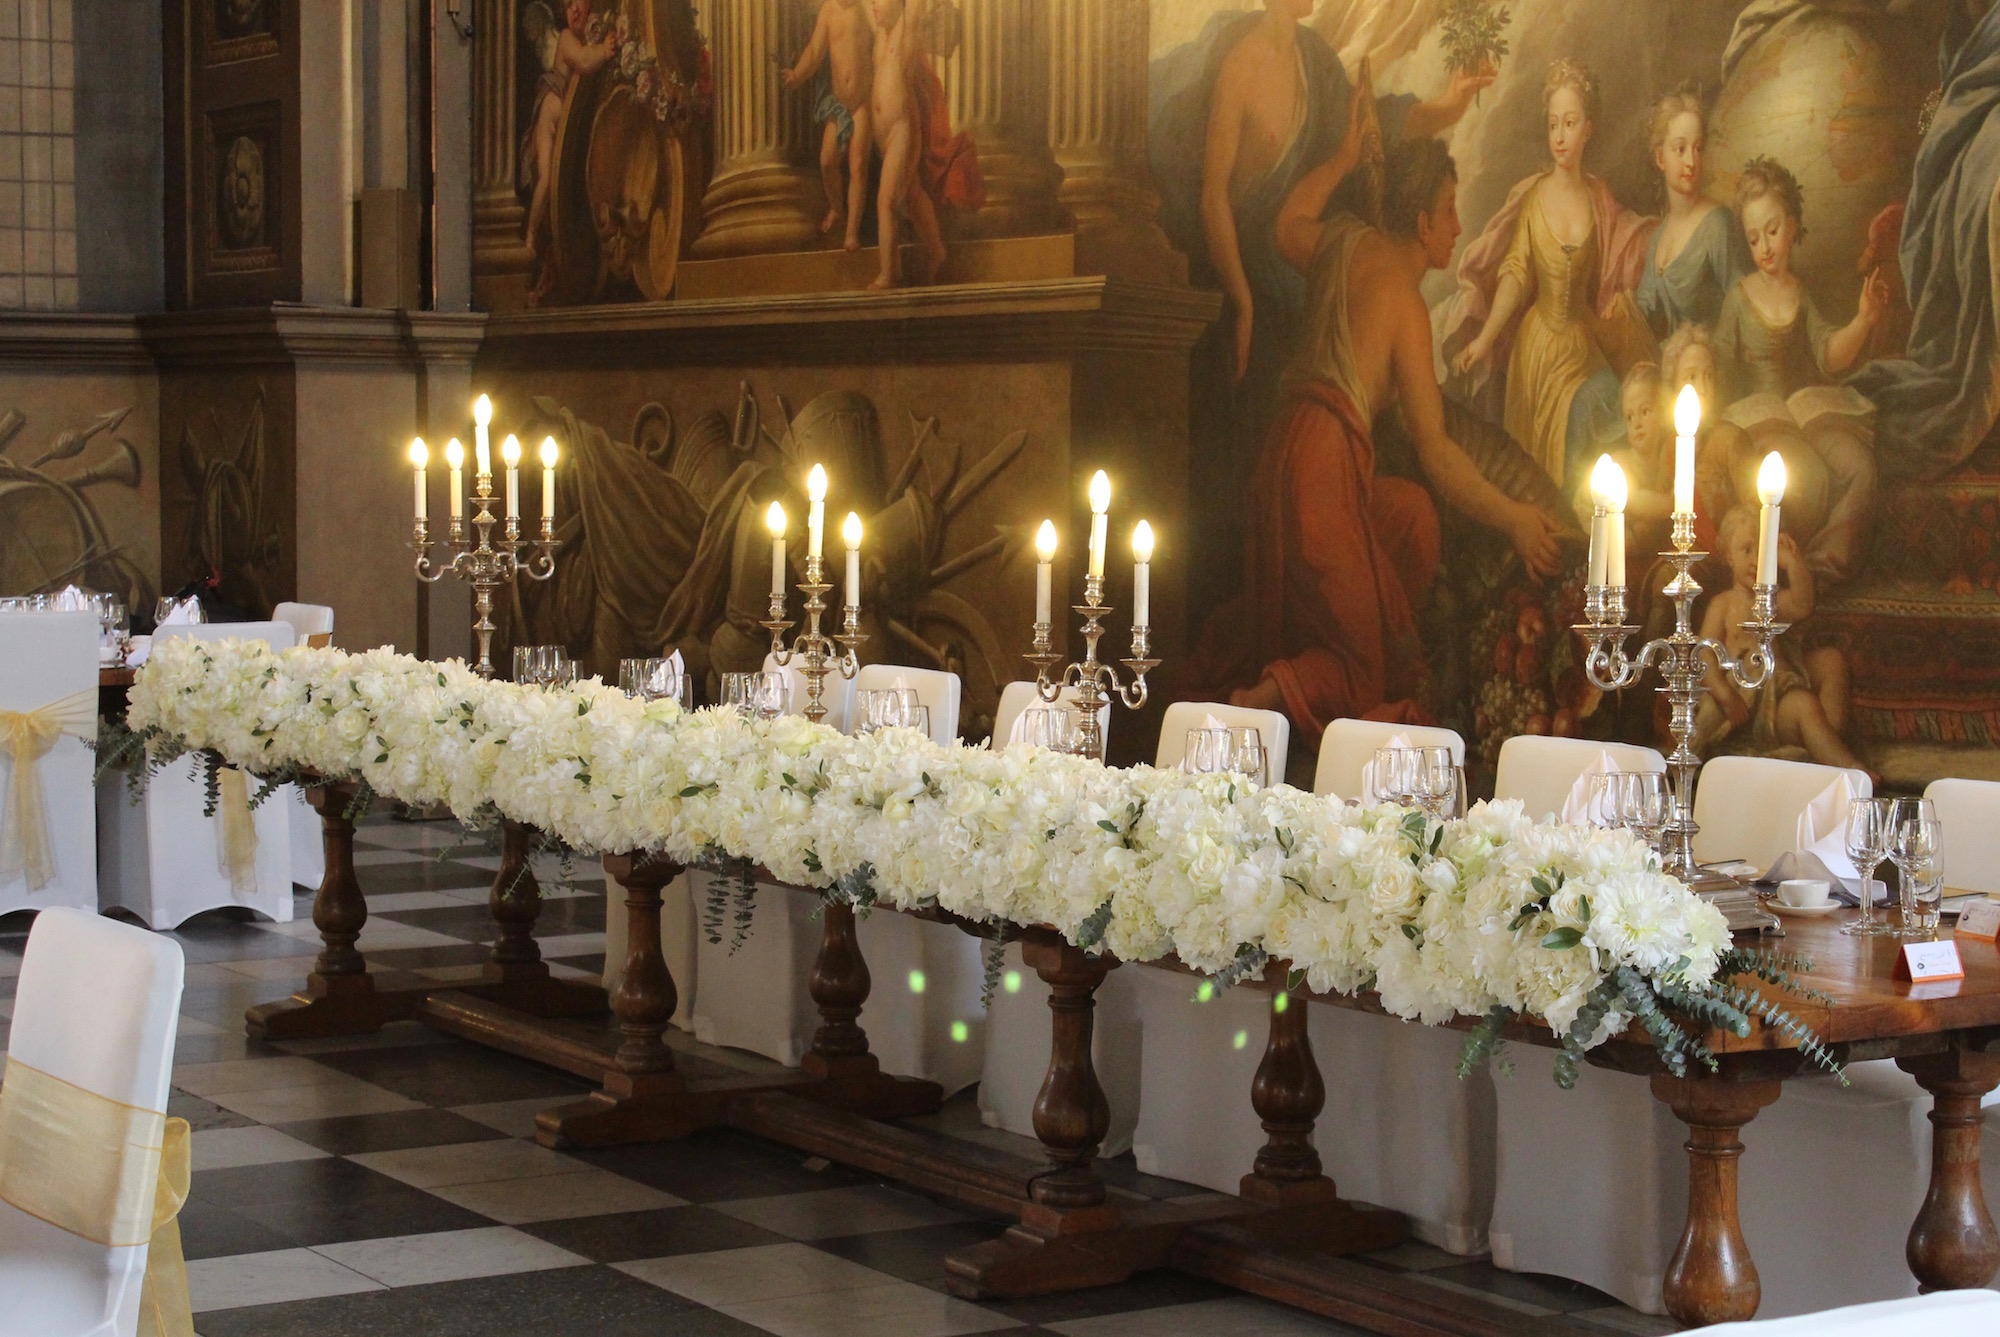 Top Table Display at The Painted Hall, Old Royal Naval College, Greenwich